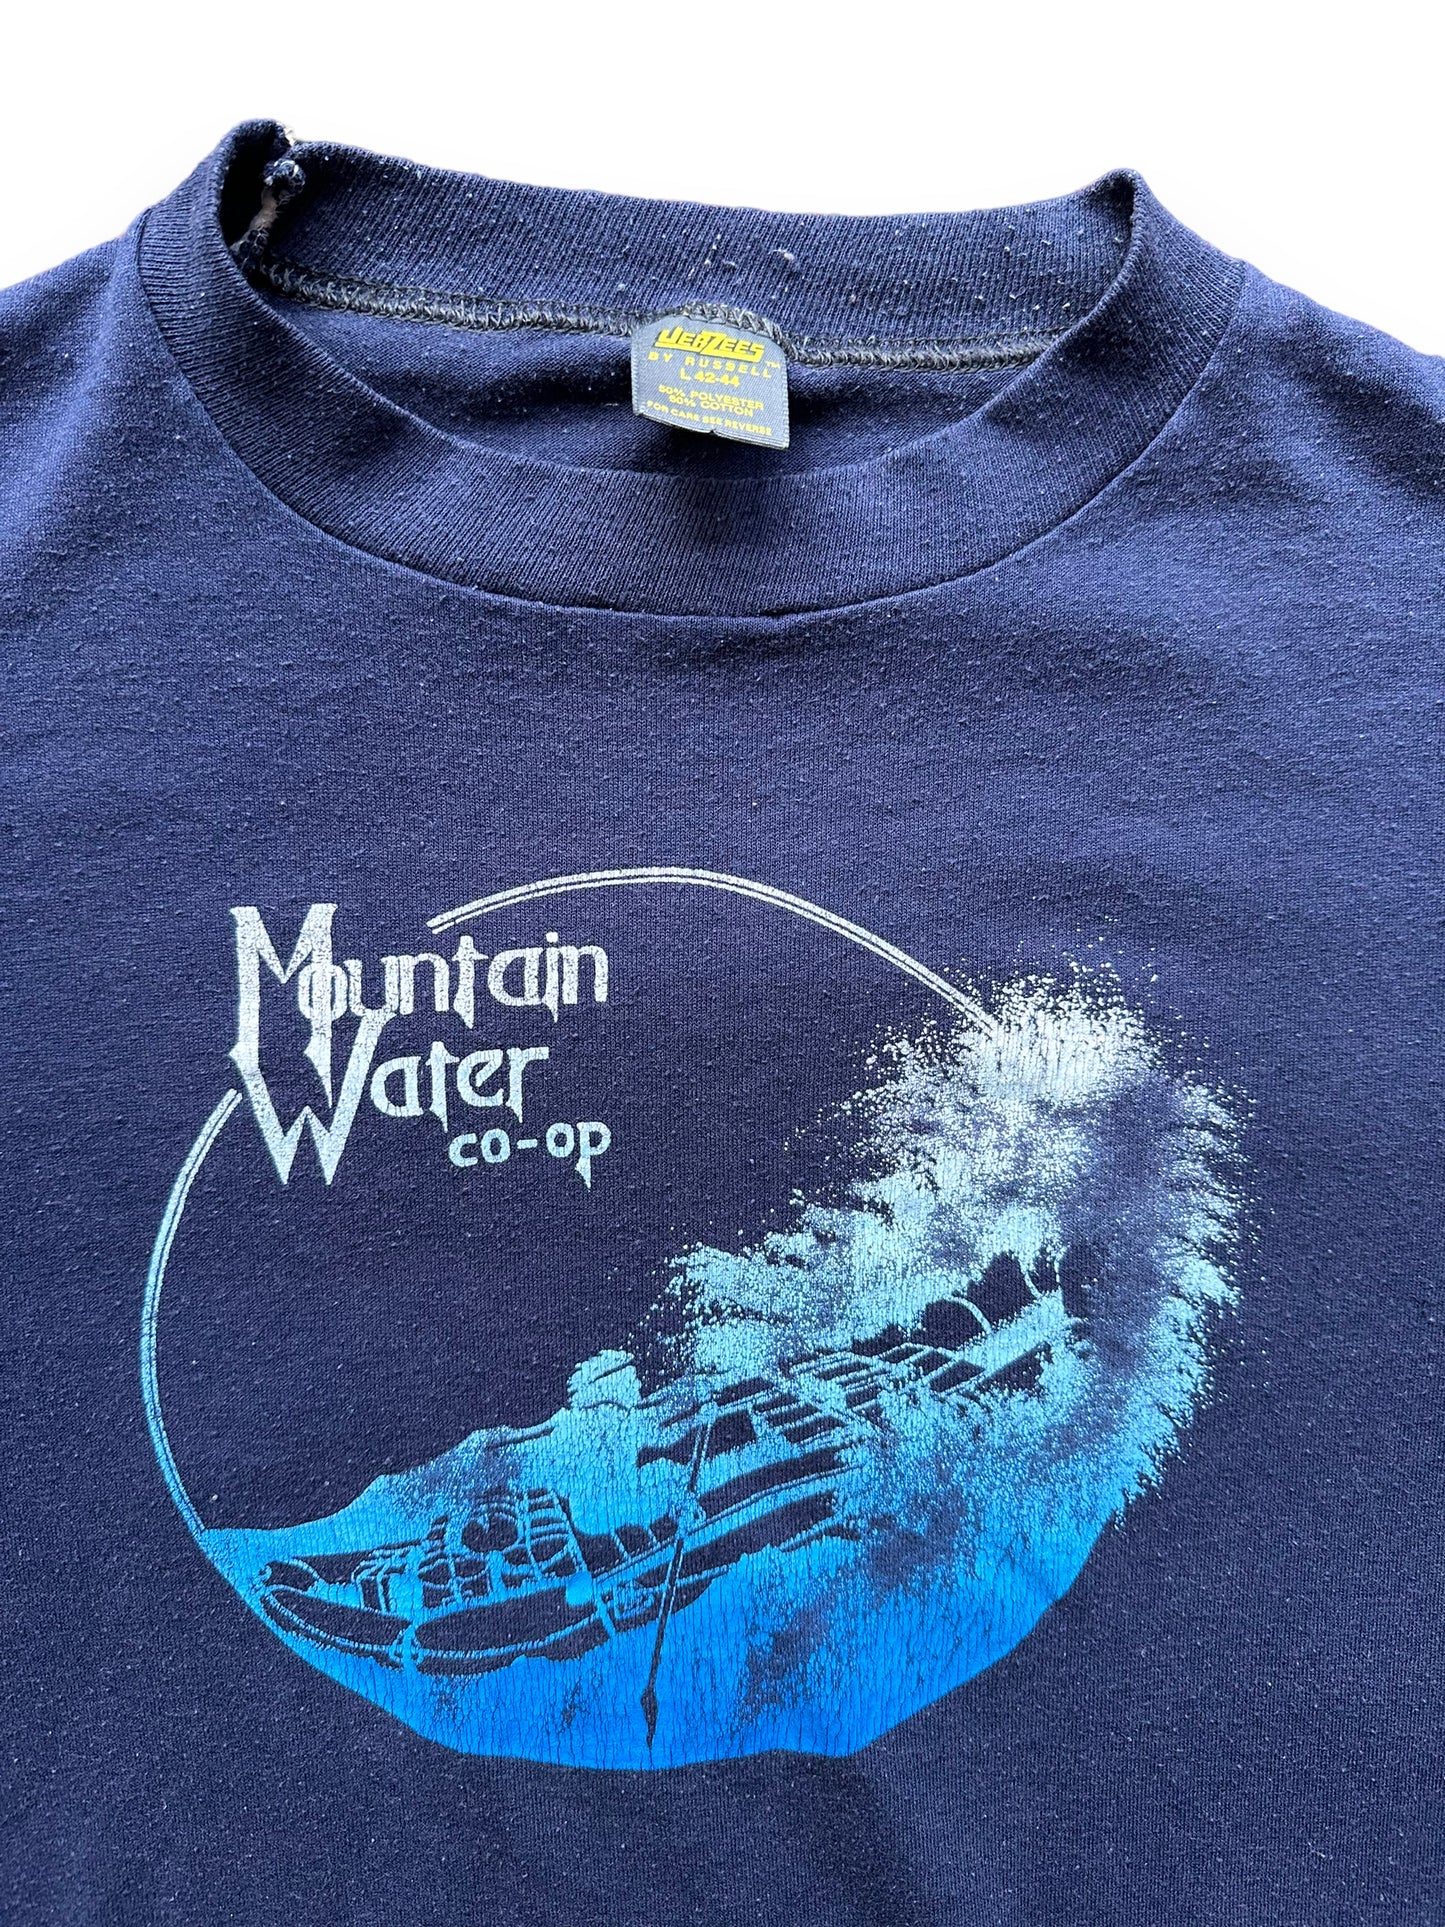 Vintage Mountain Owl Vintage Barn Co-op Water Tee Graphic The SZ Seatt – L | T-Shirts